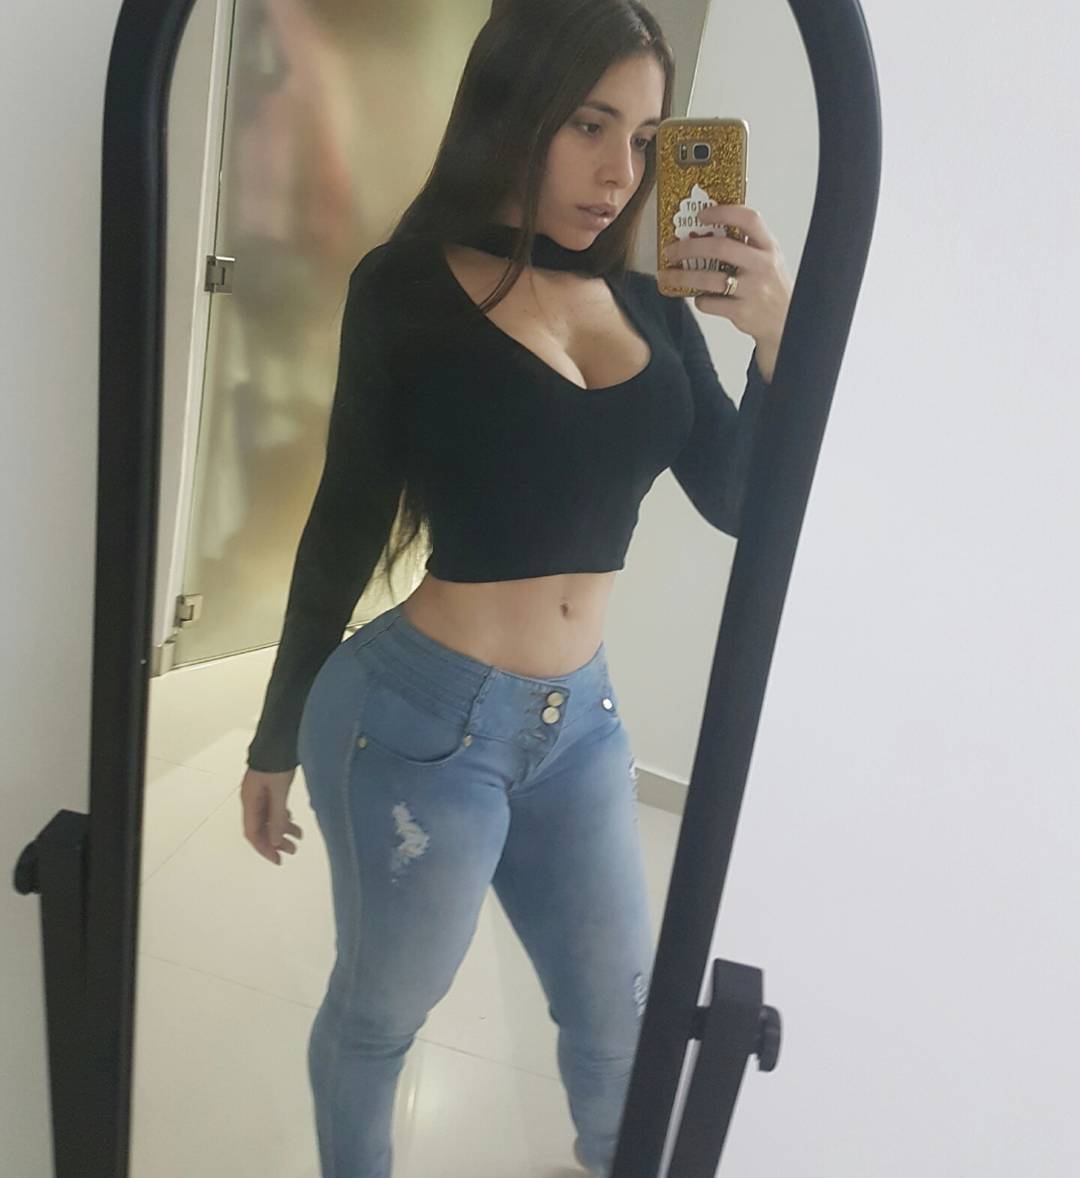 Thicc ass in jeans